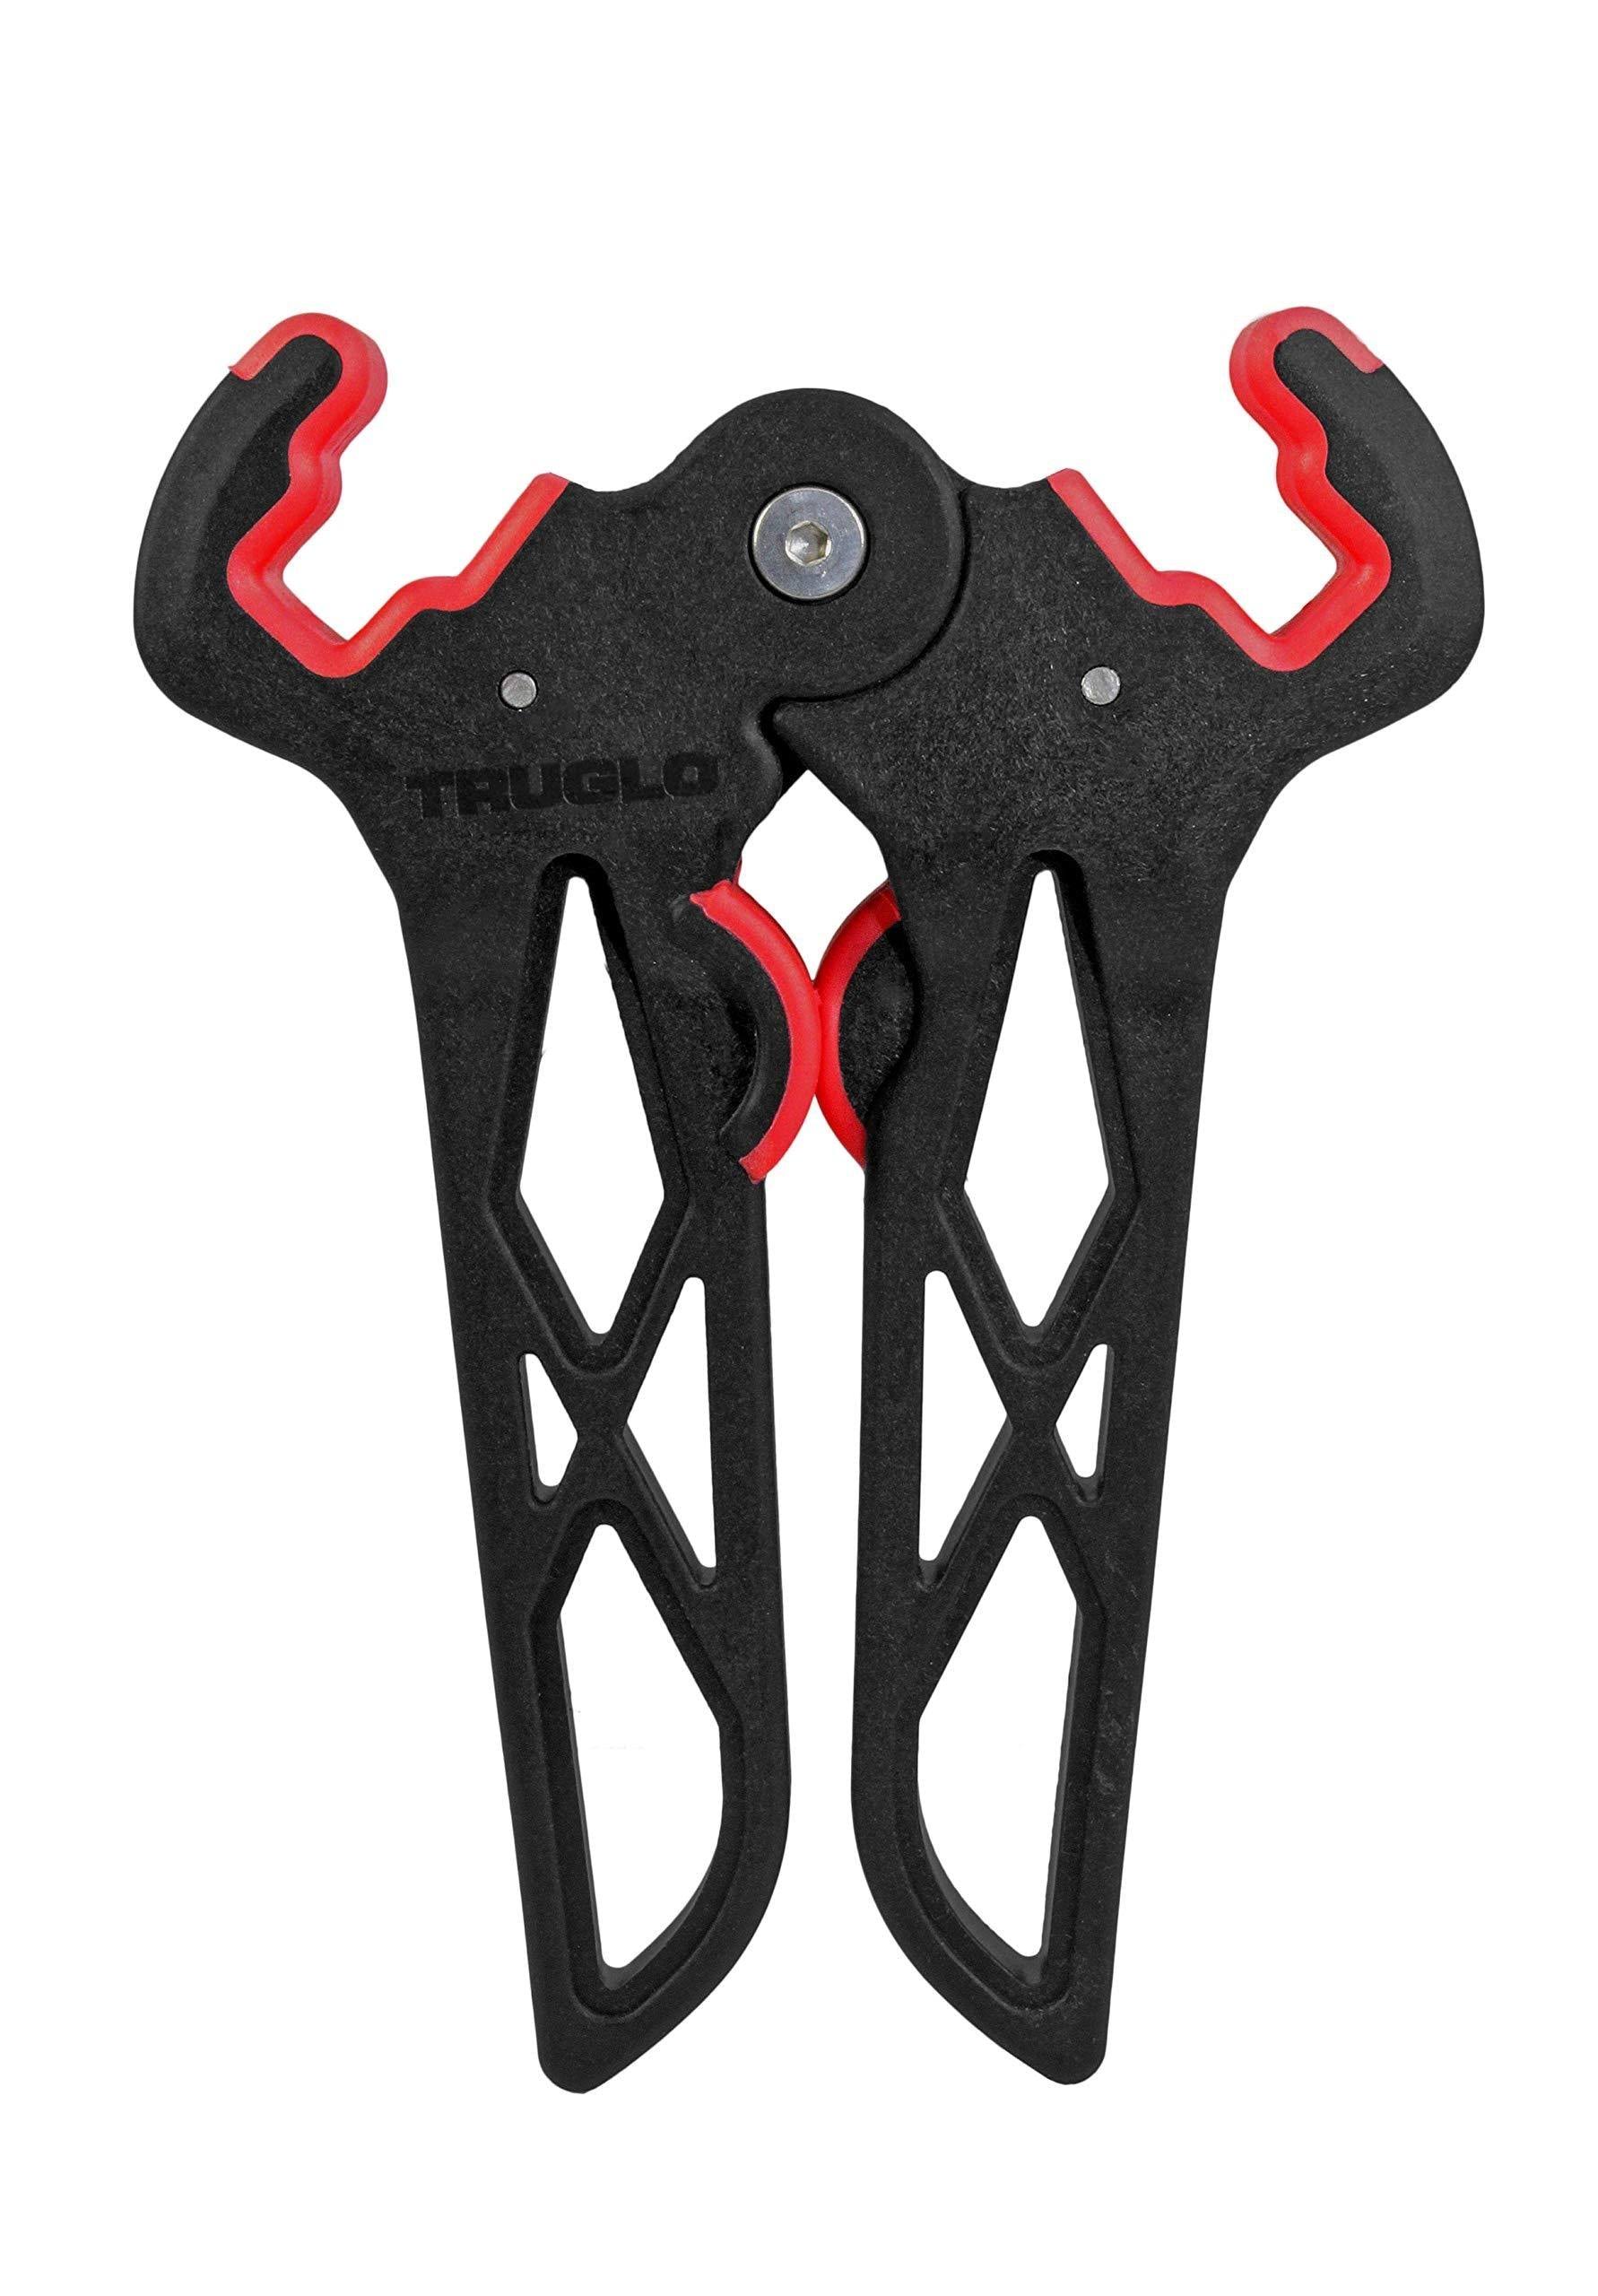 Truglo Mini Bow Stand - Black and Red